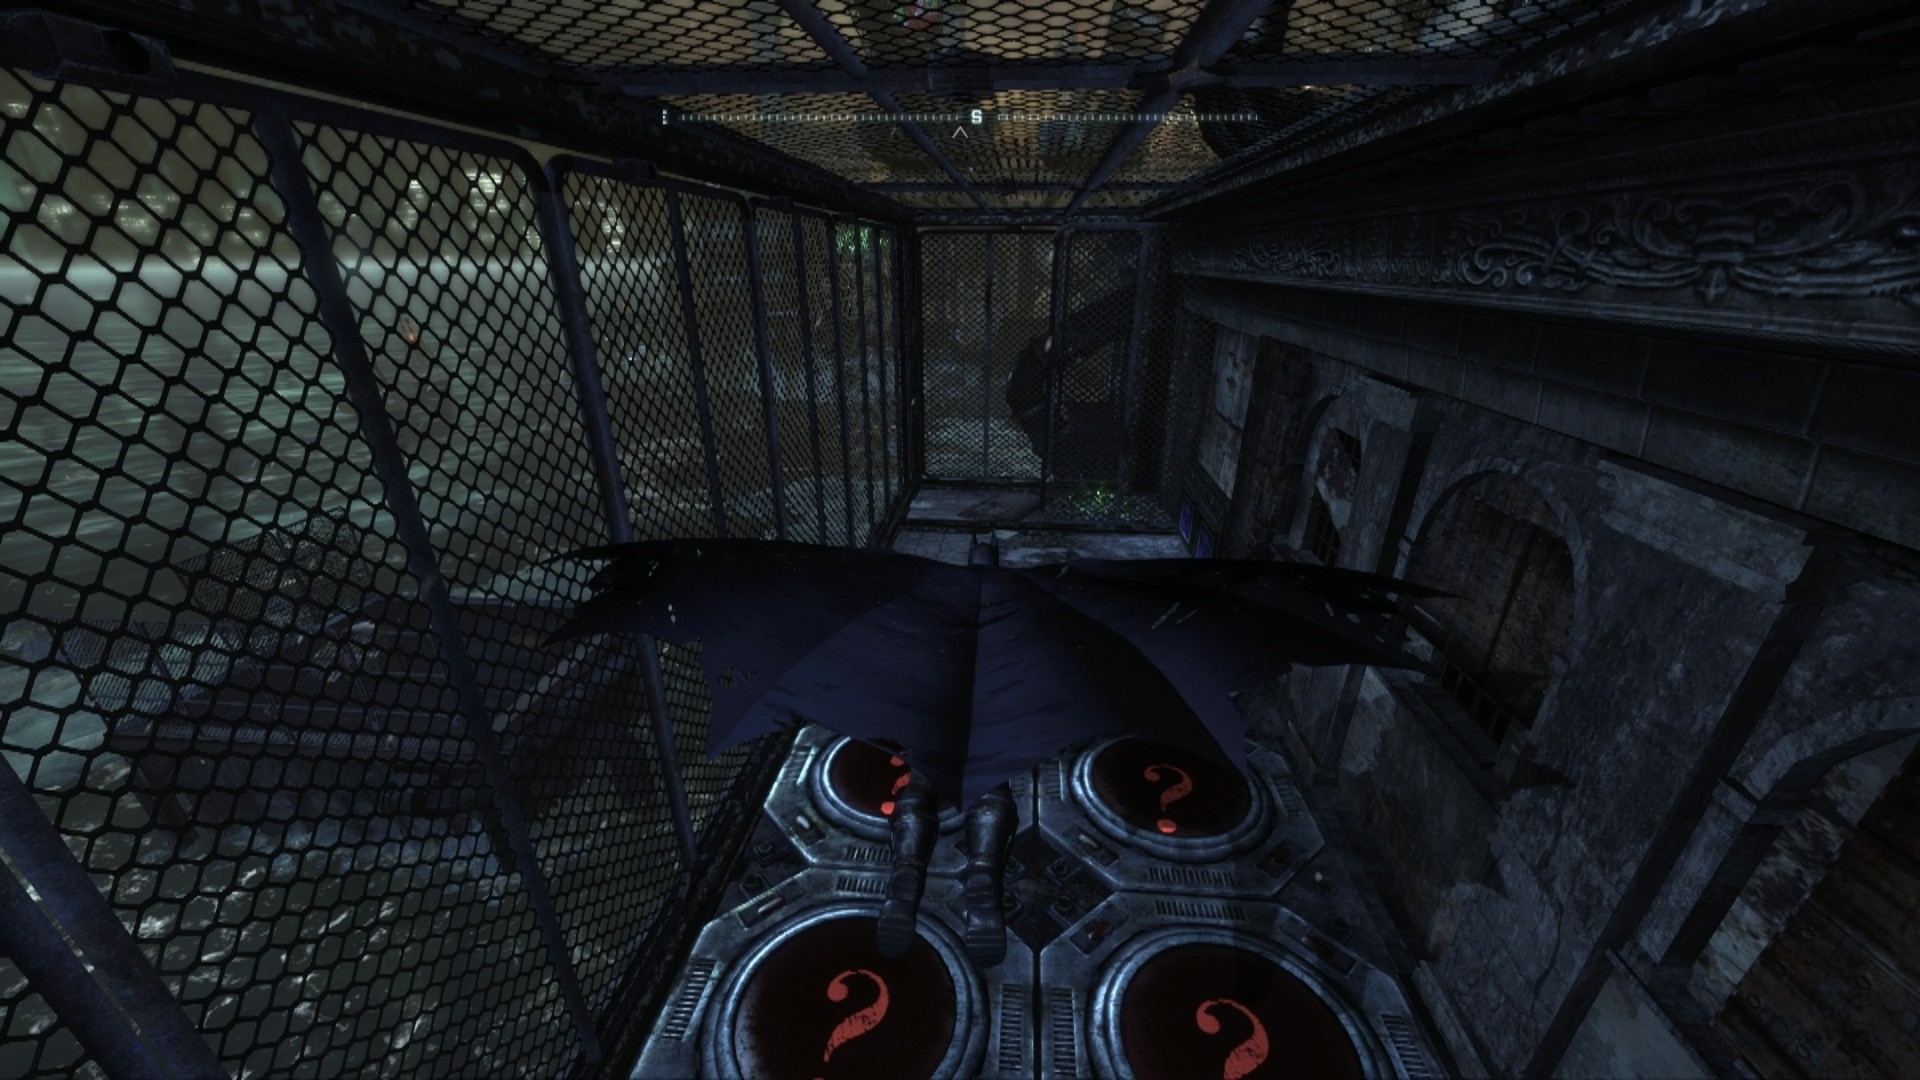 On top of kran Toys, use remote batarang right after the first door opens inside the vent, hit the question mark, then use second batarang to remote to the